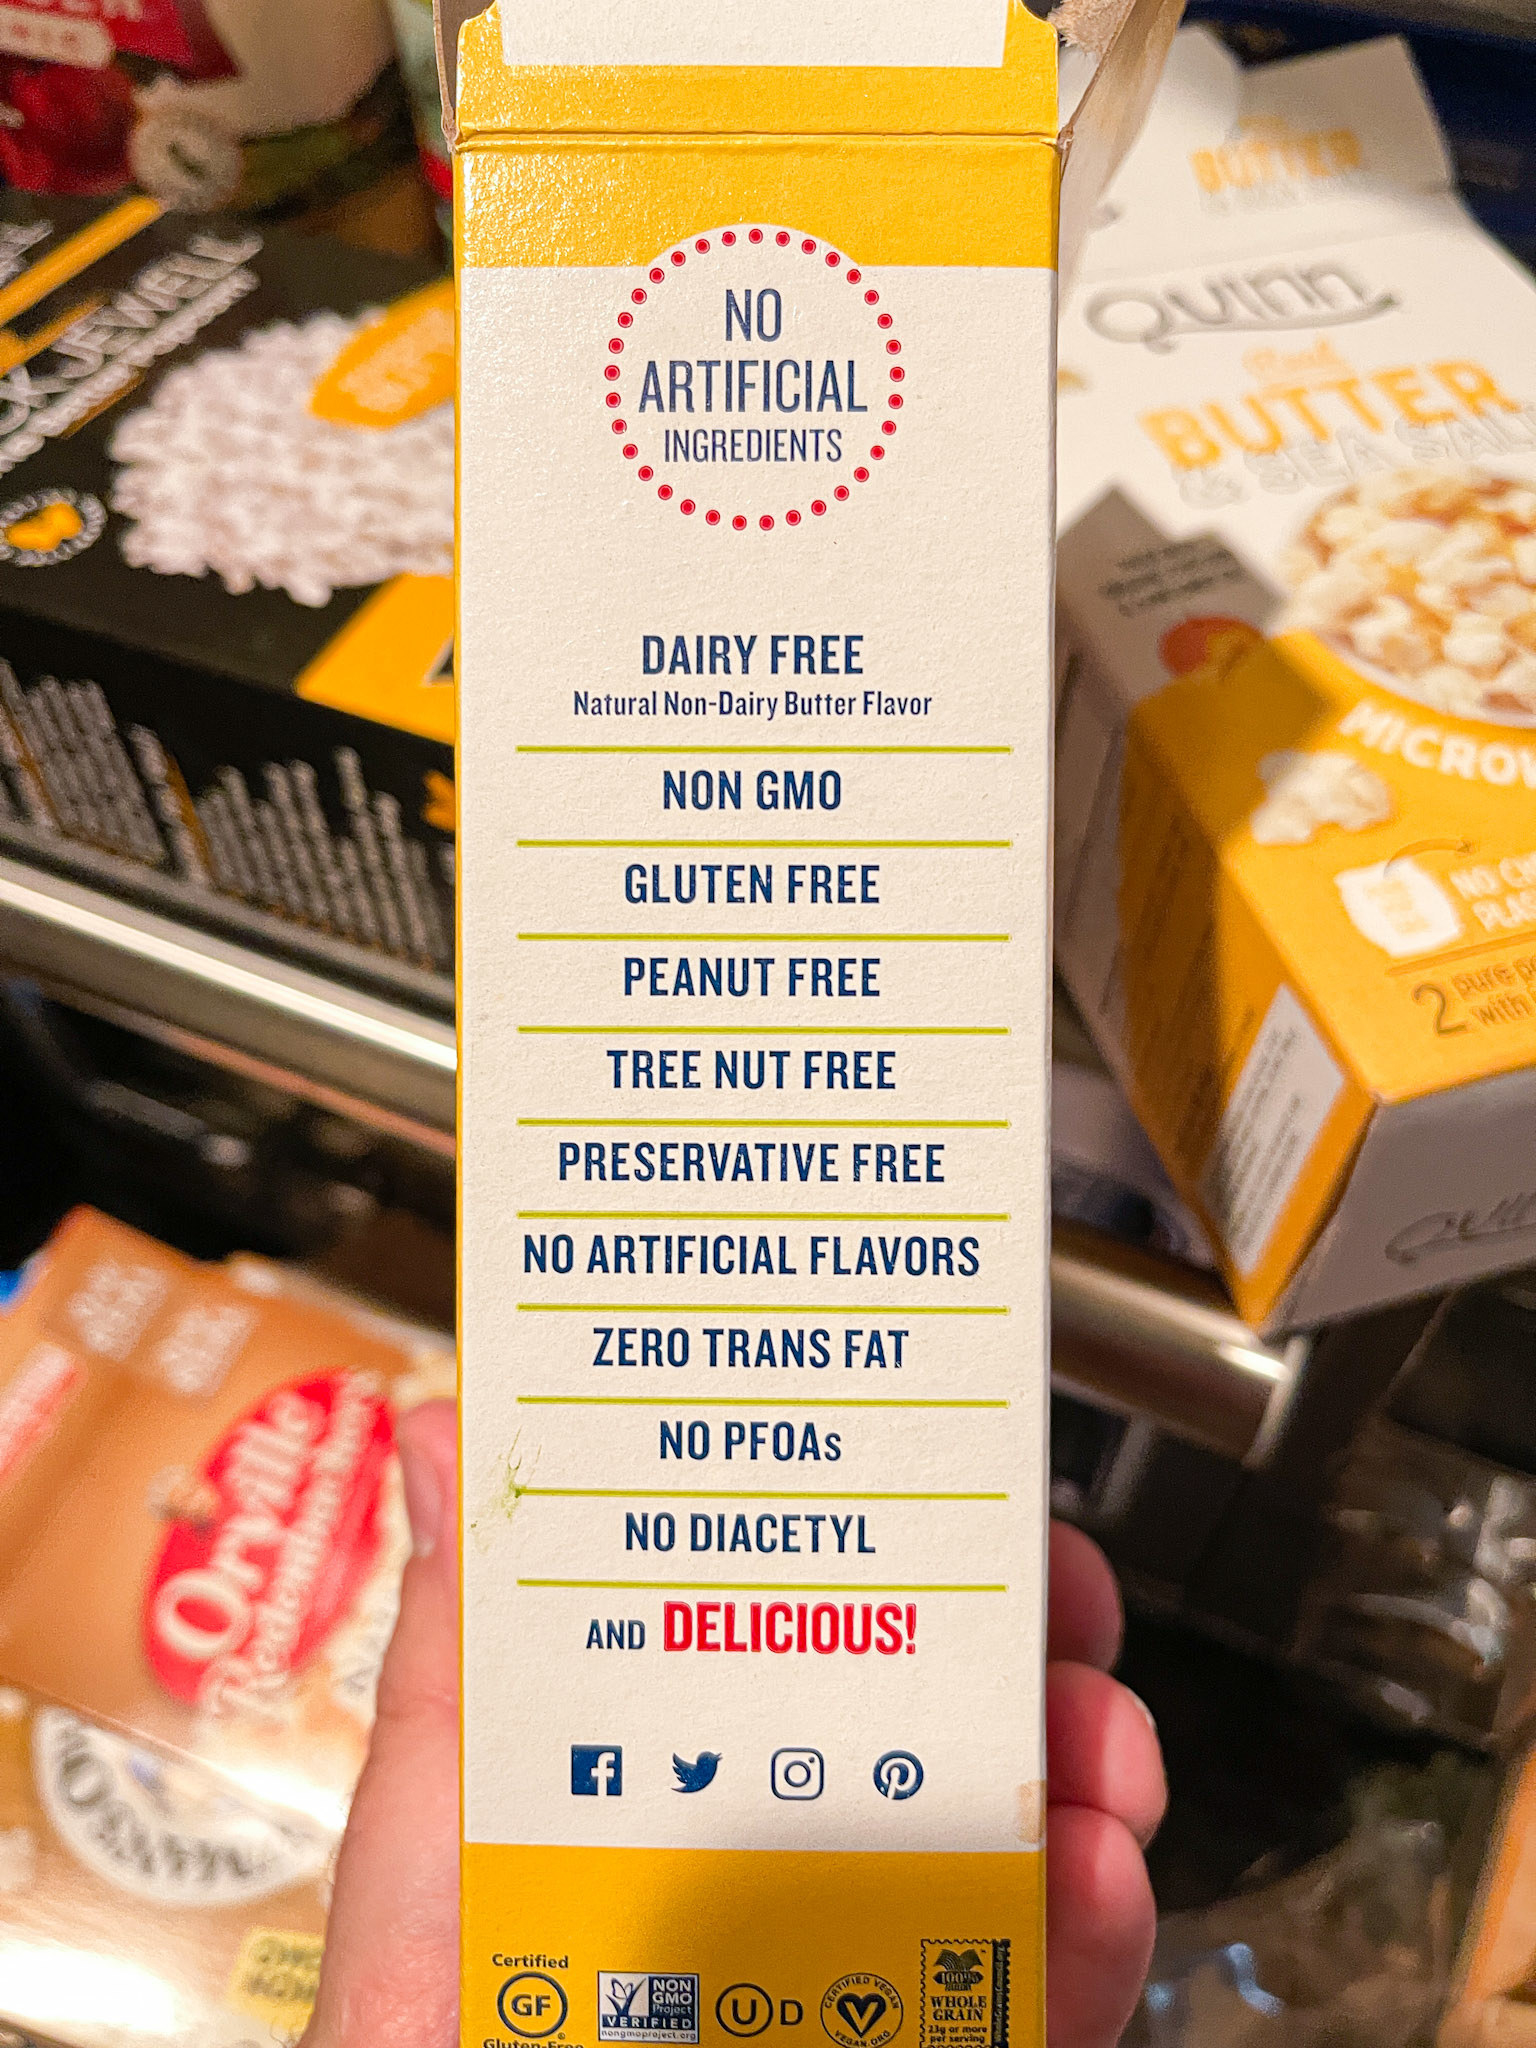 list of artificial ingredients that SkinnyPop does NOT contain